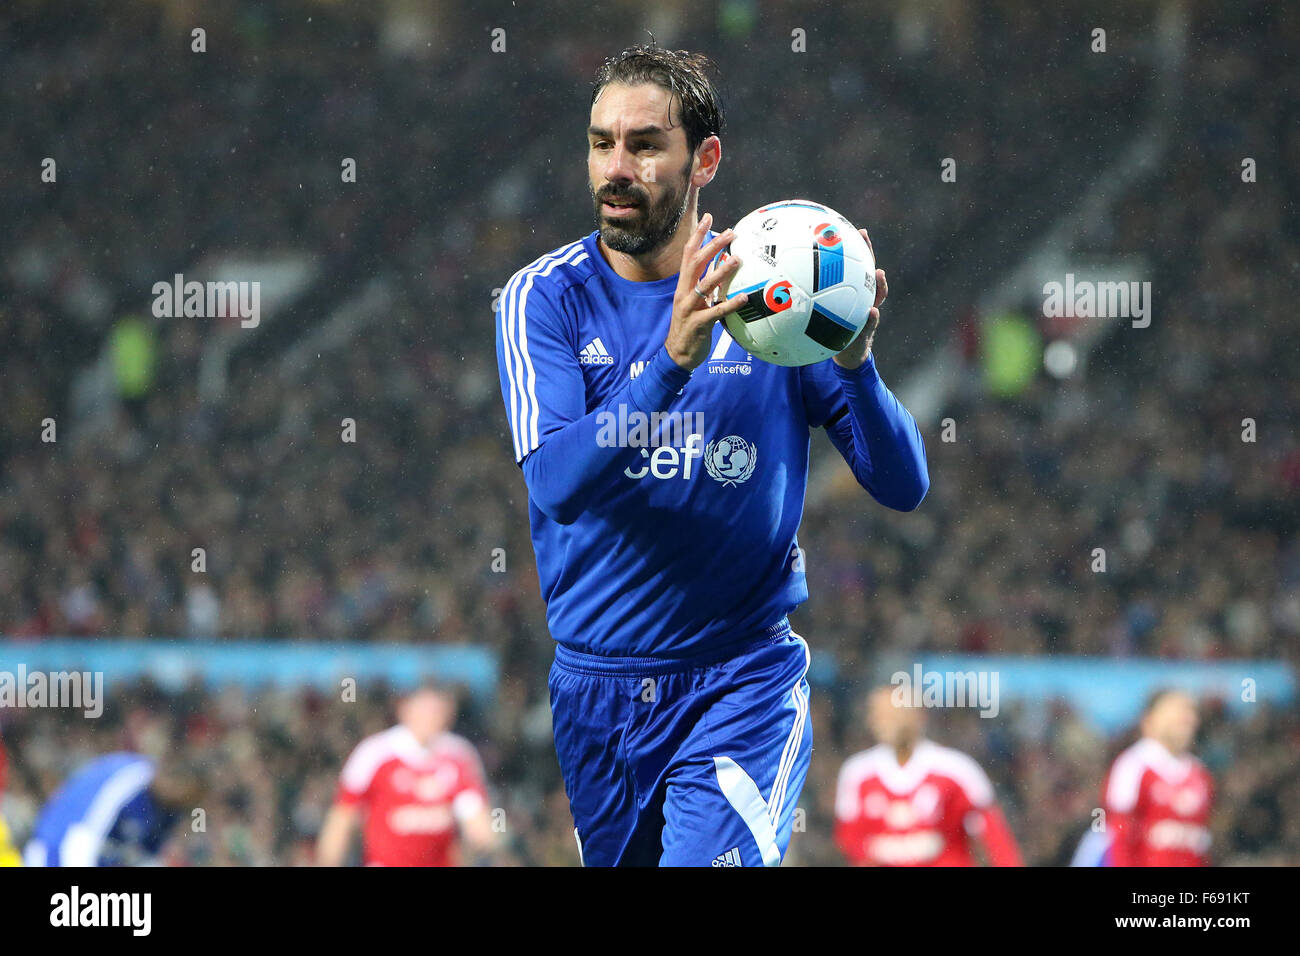 Old Trafford, Manchester, UK. 14th Nov, 2015. Unicef Match for Children. GB and NI XI versus Rest of the World XI. Robert Pires of France (Rest of World) prepares to take a corner Credit:  Action Plus Sports/Alamy Live News Stock Photo